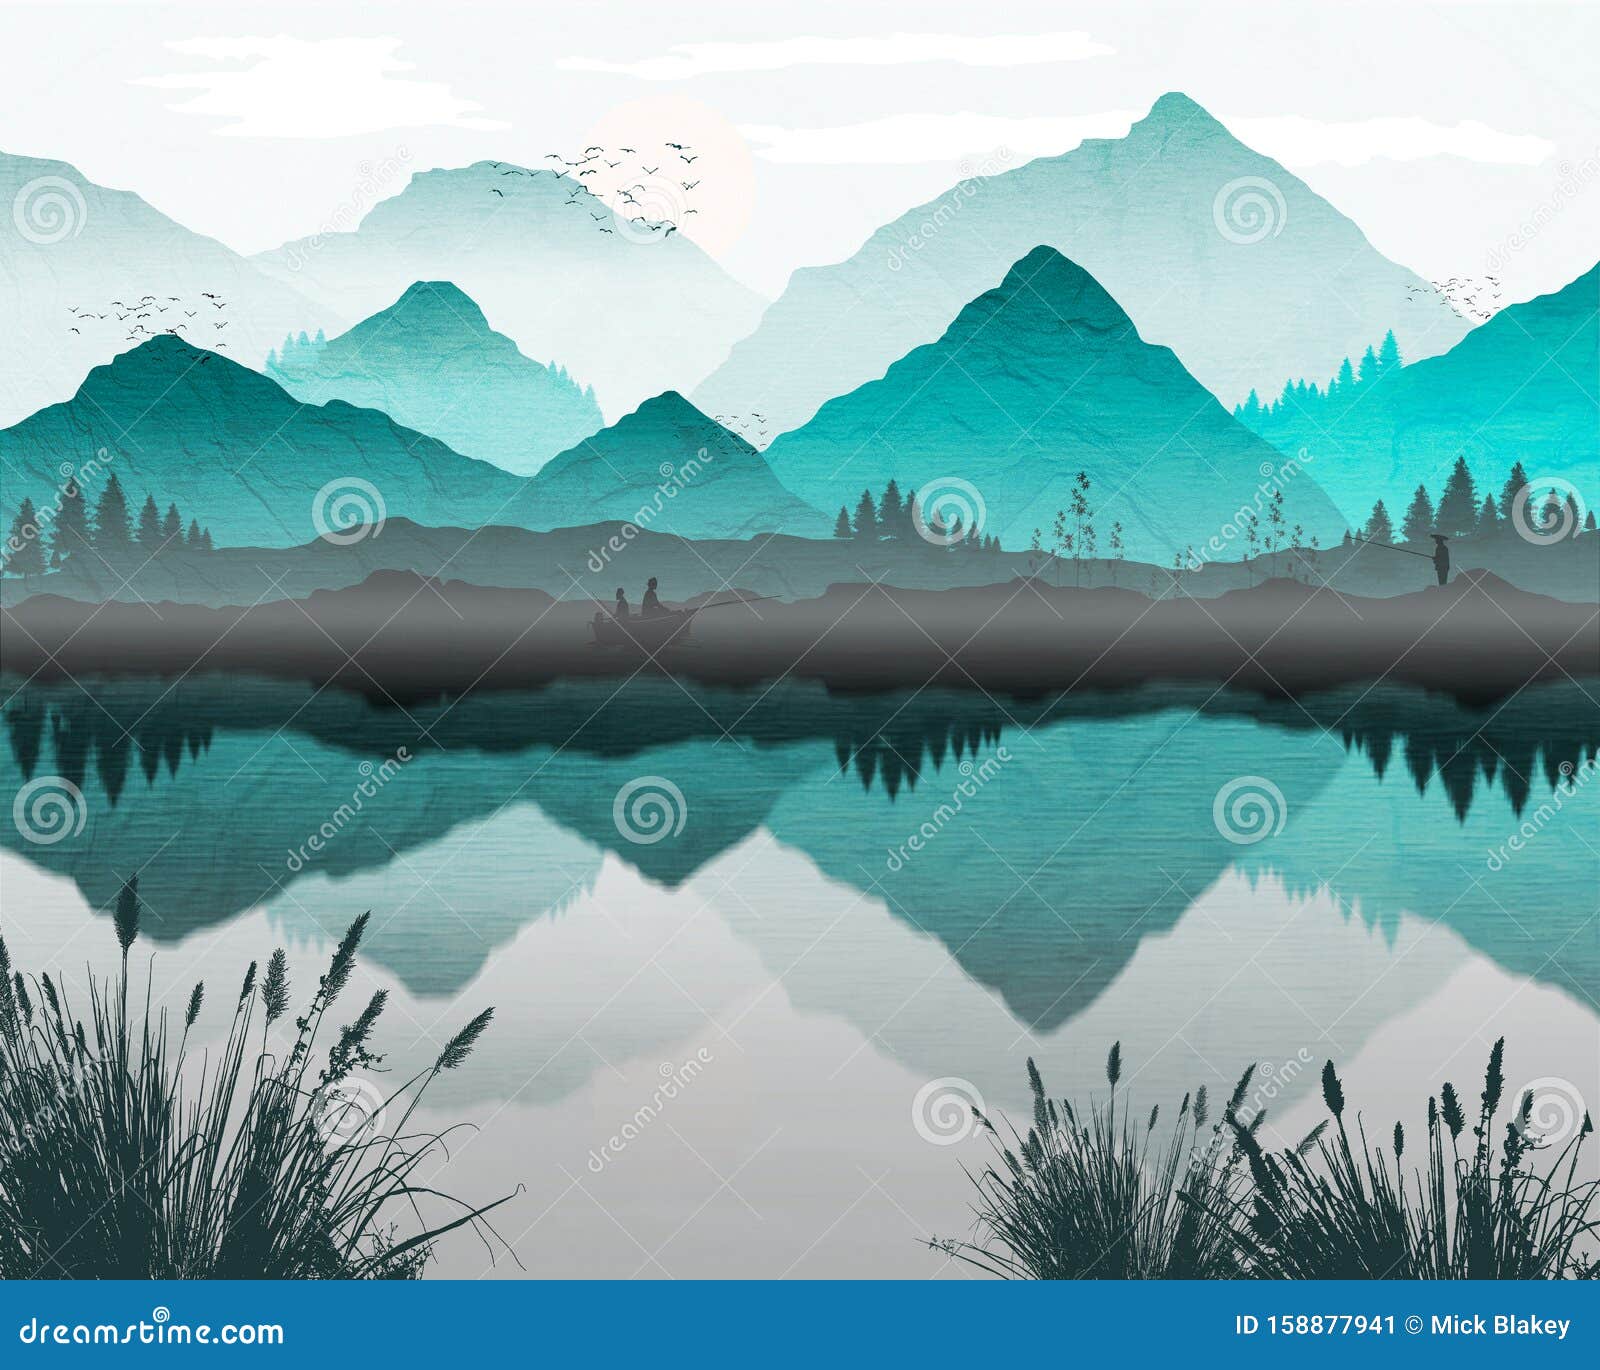 oriental japanese landscape, with fishing boat and lone fisherman on banks of lake. reflection of mountains and trees in water,